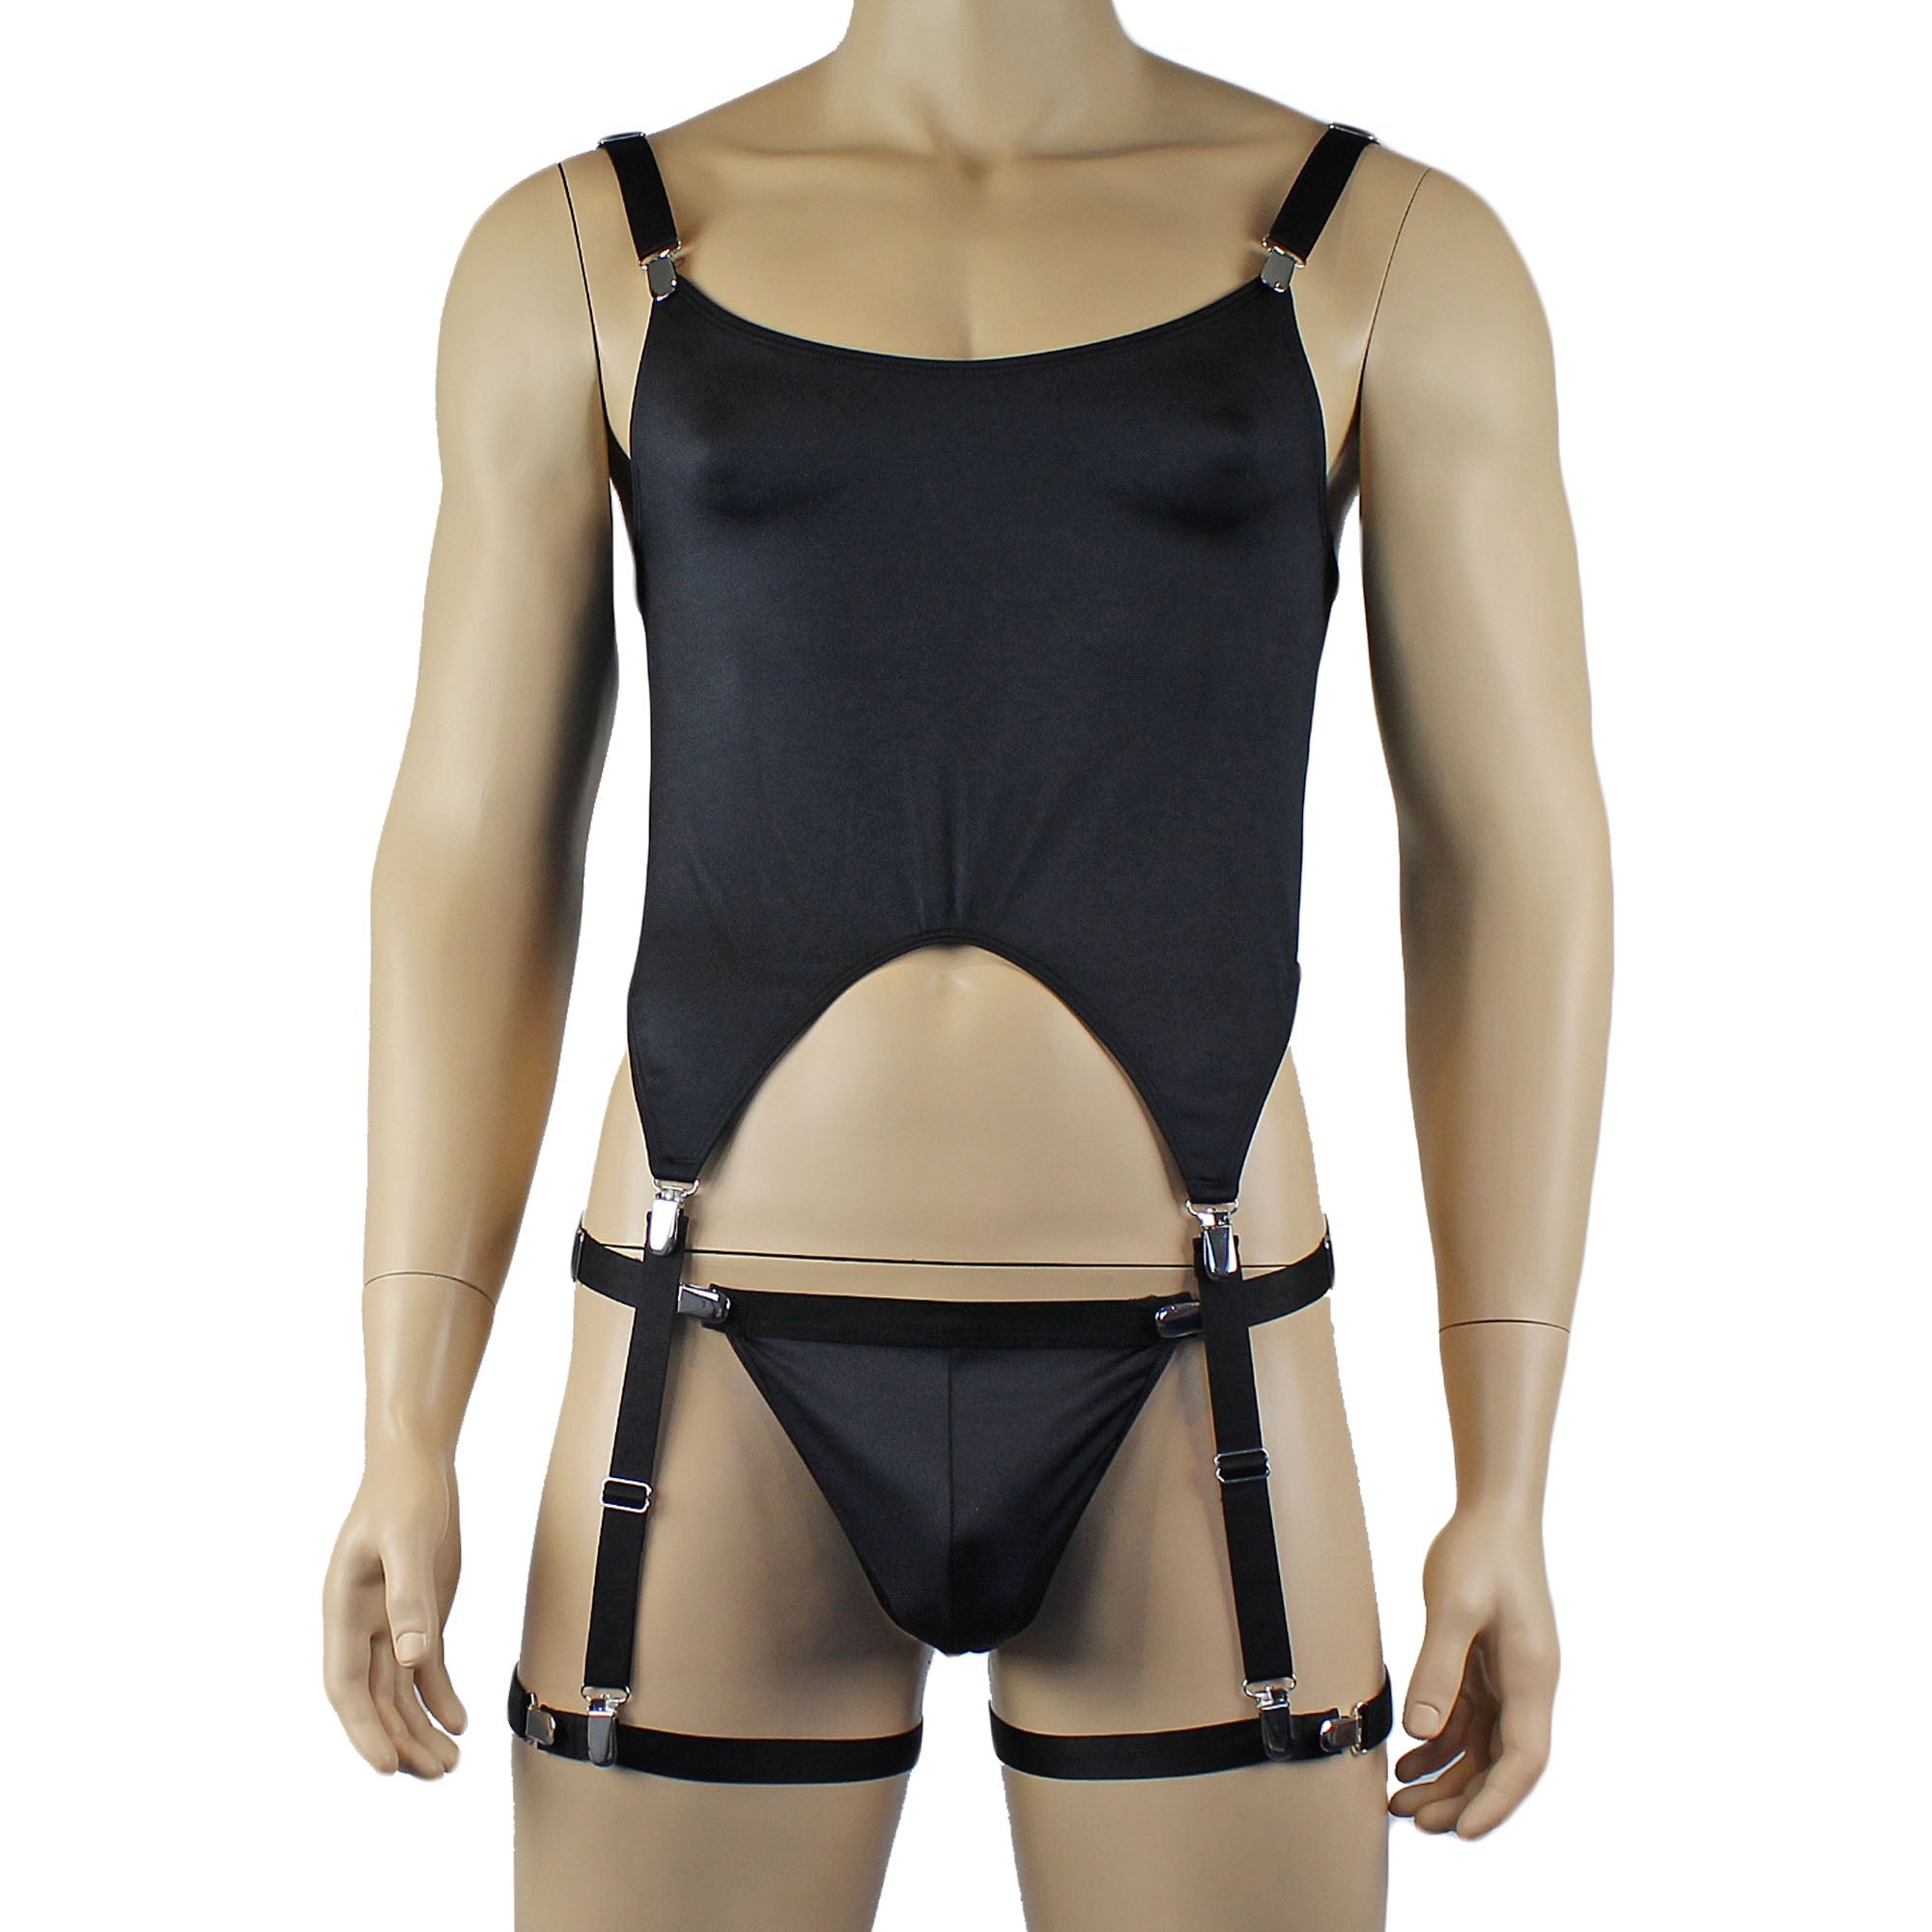 Mens Janice Corset Top, Thong and comes with Detachable Garters & Leg Bands - Sizes up to 3XL